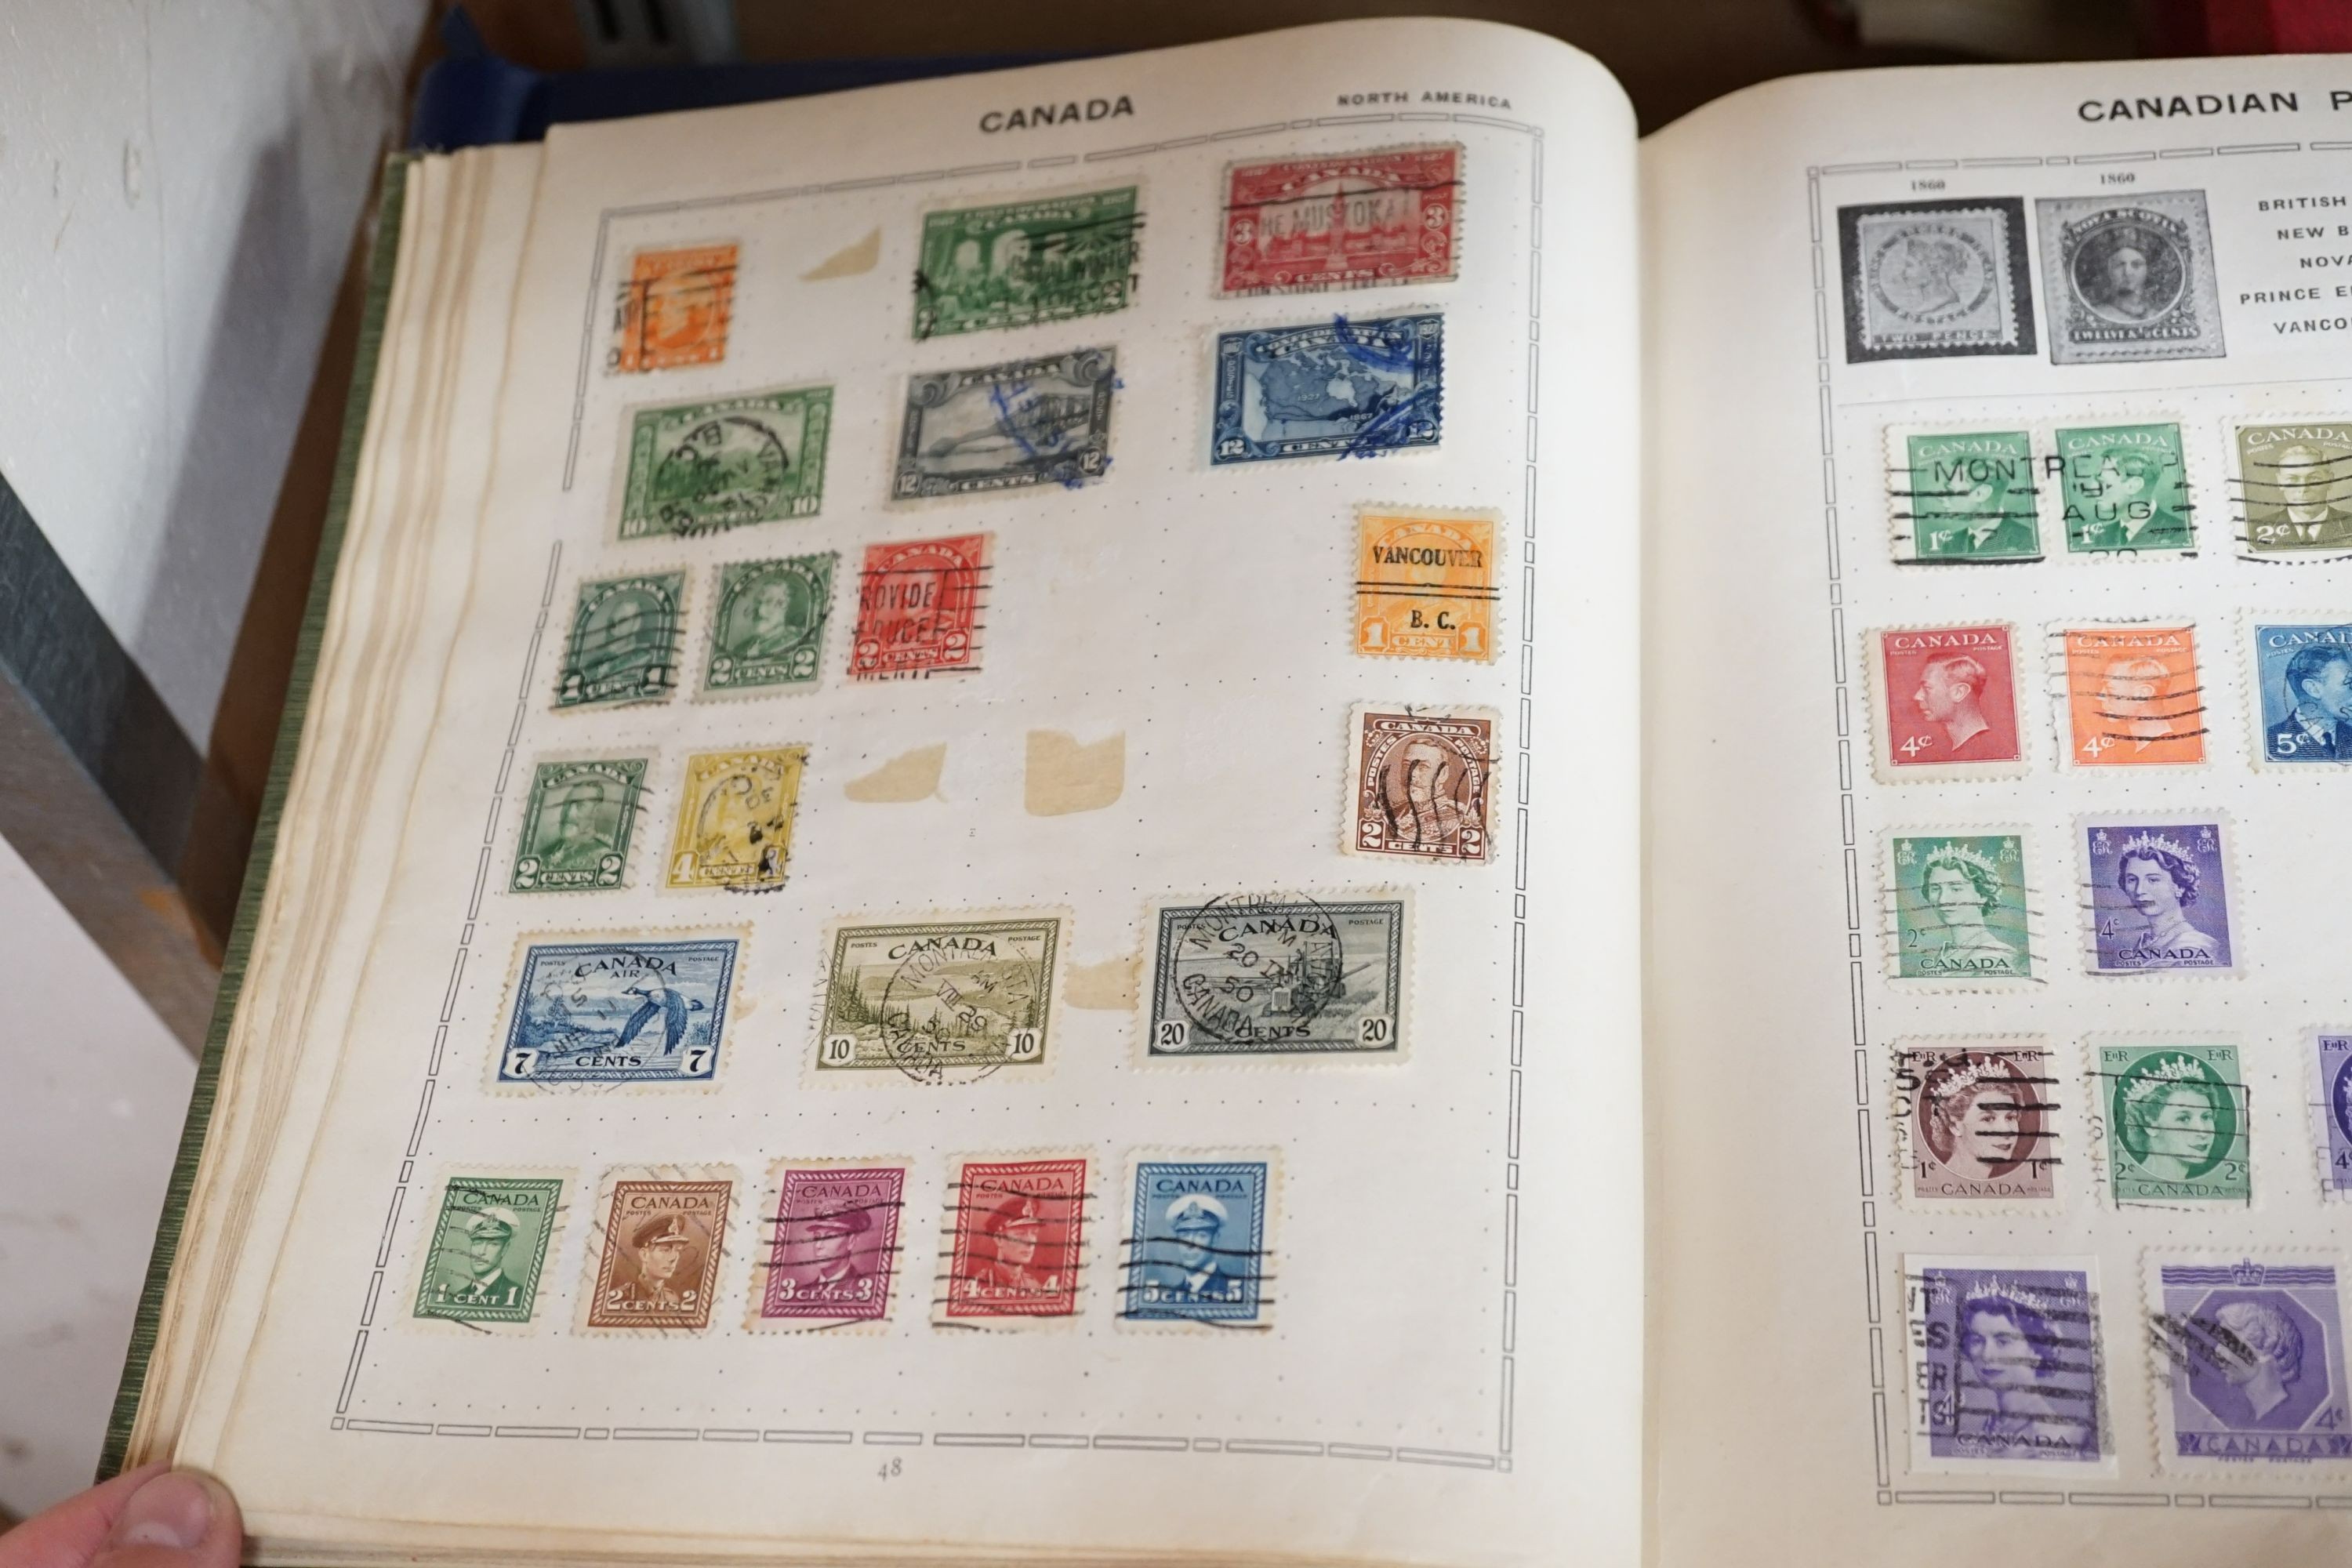 World stamps in 6 albums including Lincoln and Triumph album with G.B. 1841 1d red, browns and 2d blues used, 1d red plate 138 mint block of 6, British Commonwealth, Hong Kong, New Zealand 1858 1sh. emerald green used, S